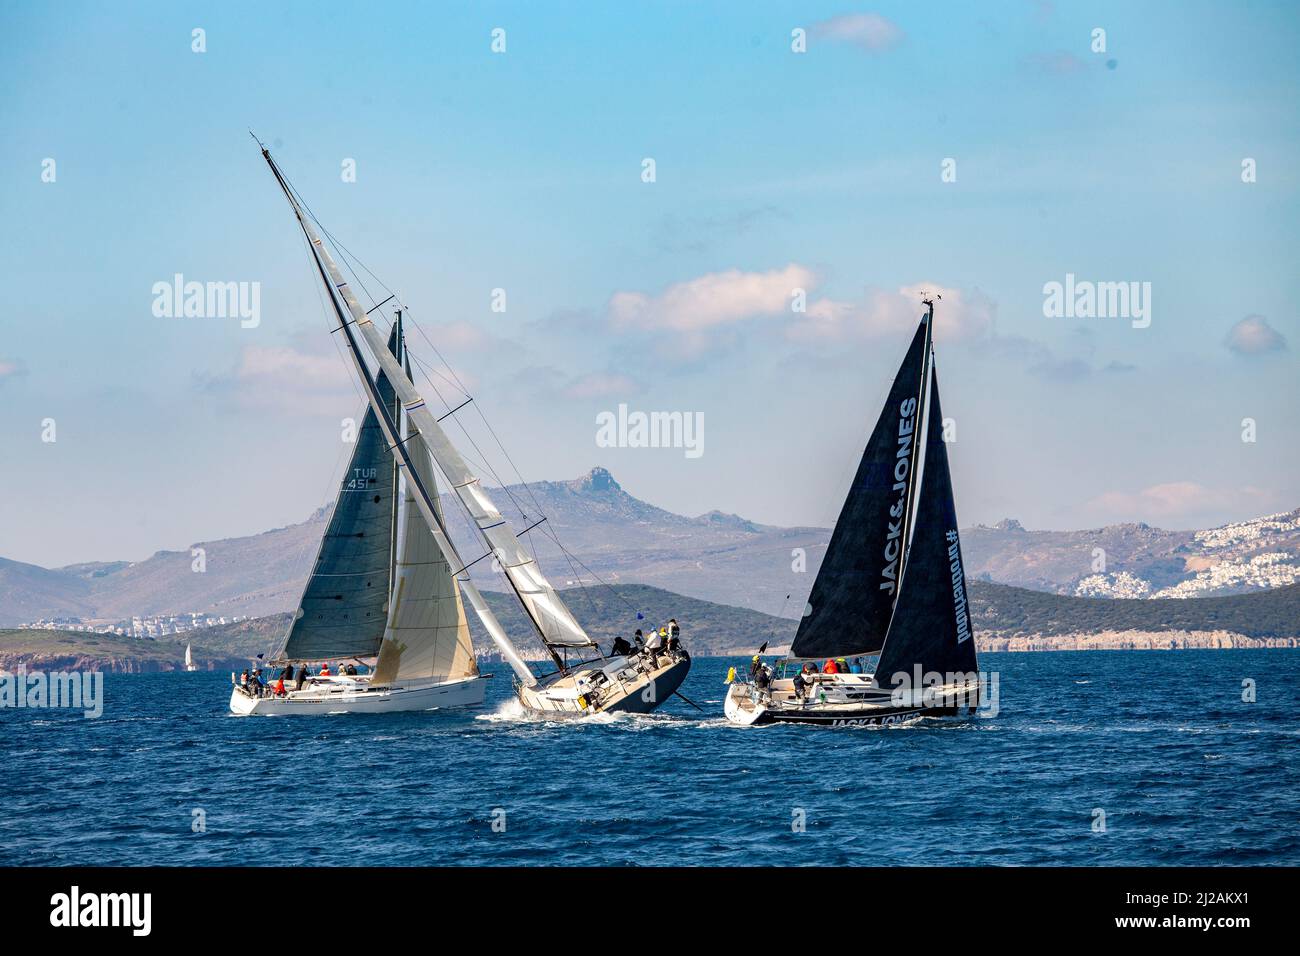 Bodrum, Mugla, Turkey - 02.25.2022: Coalition on sea. Sailing team racing at regatta. Navigation with open sails. Accident and disaster protection. Stock Photo